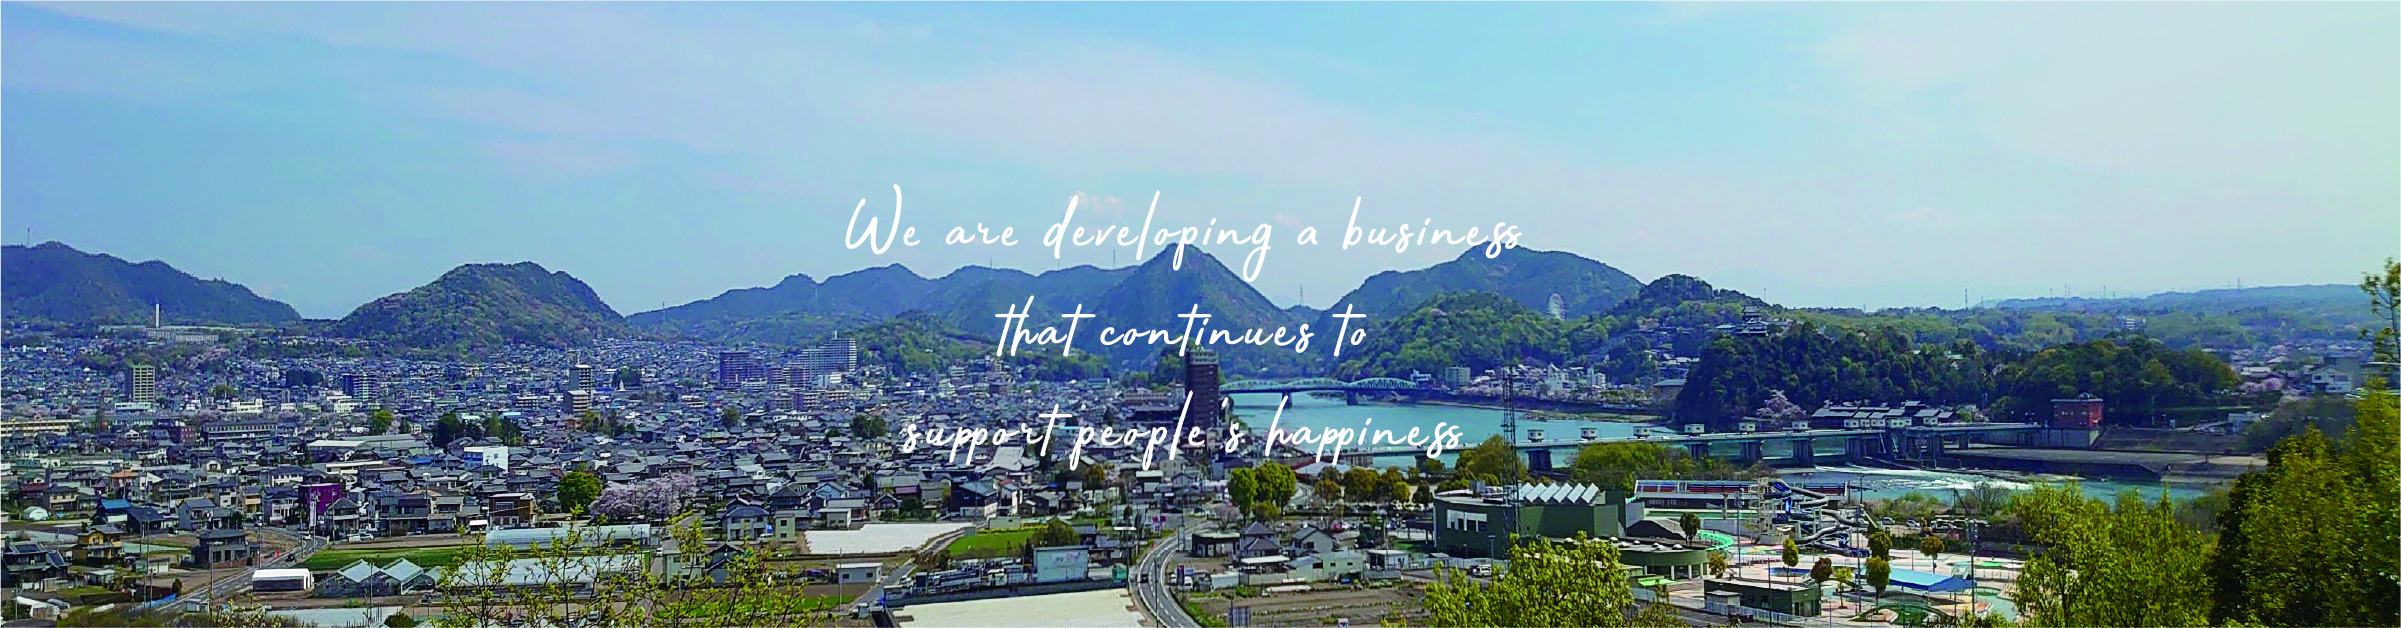 We are developing a business that continues to support people's happiness